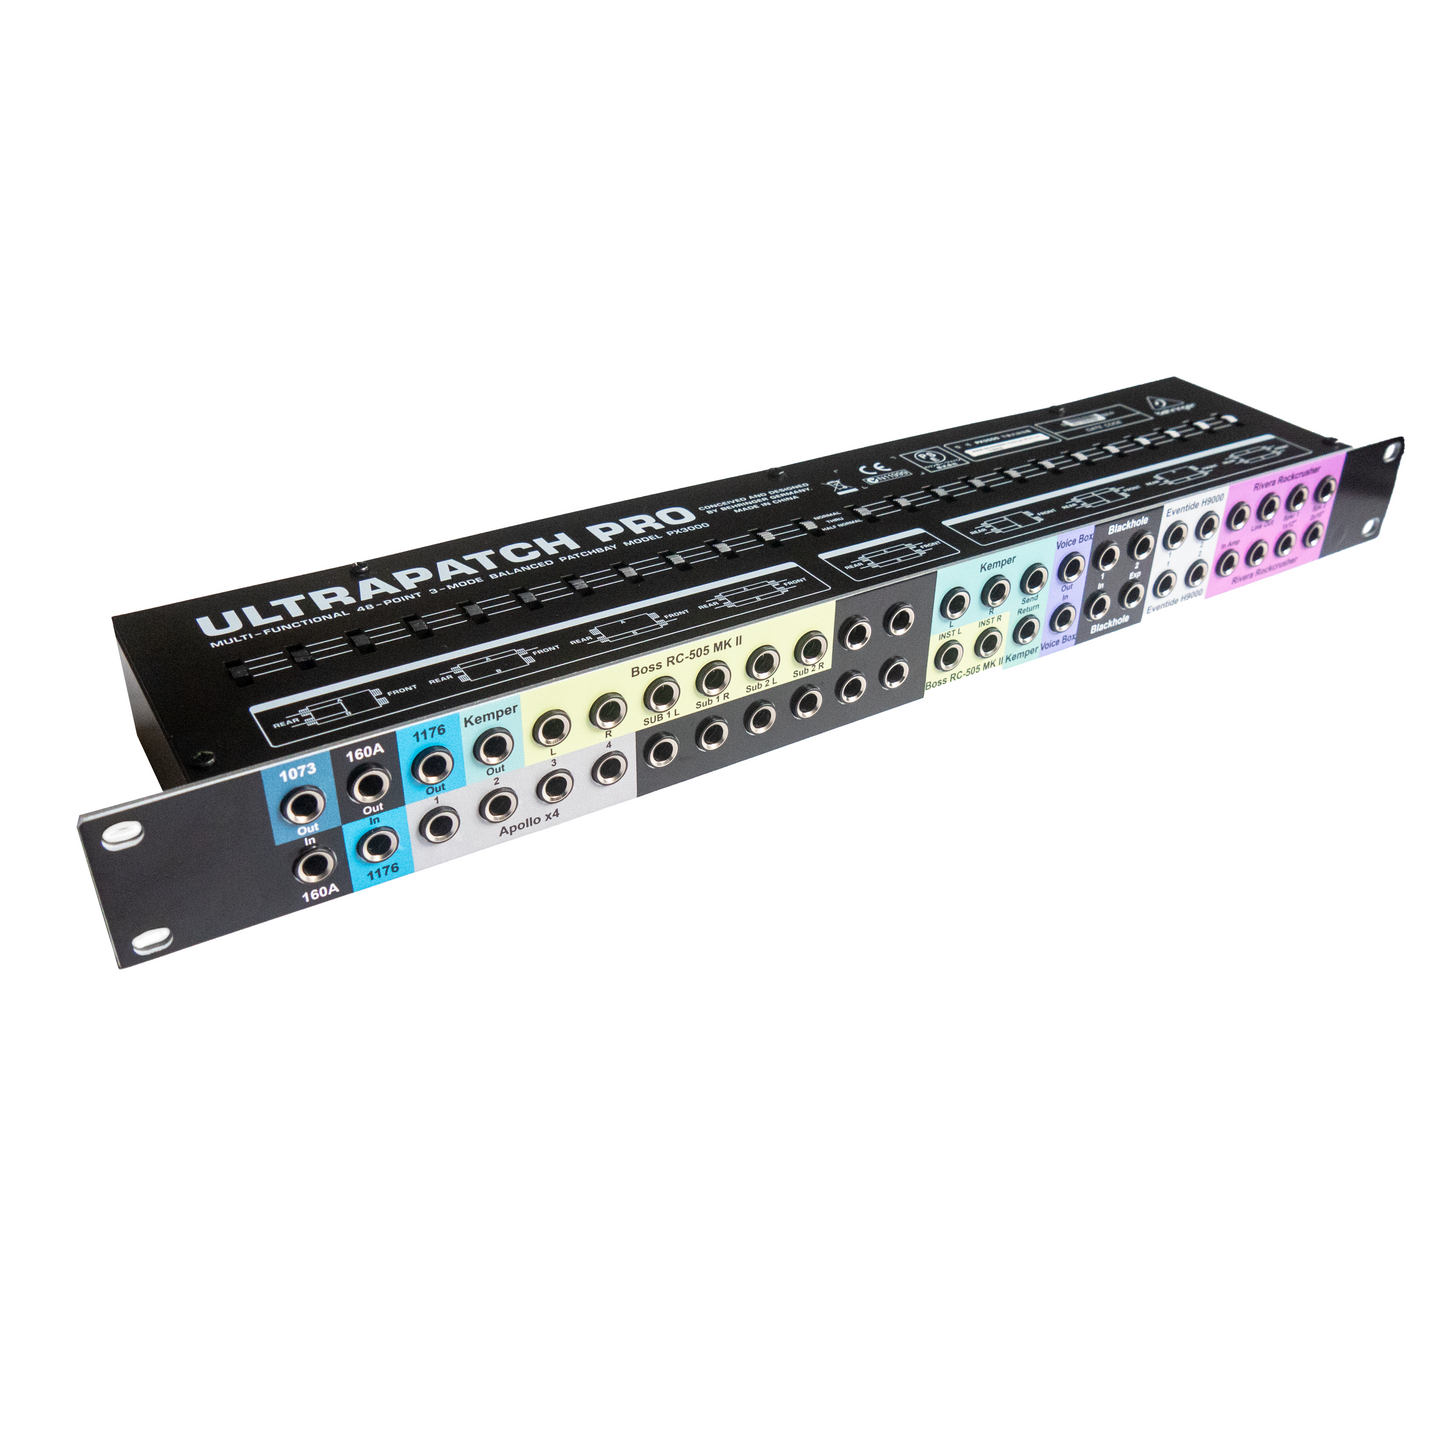 Behringer Ultrapatch Pro PX3000 Patchbay Label